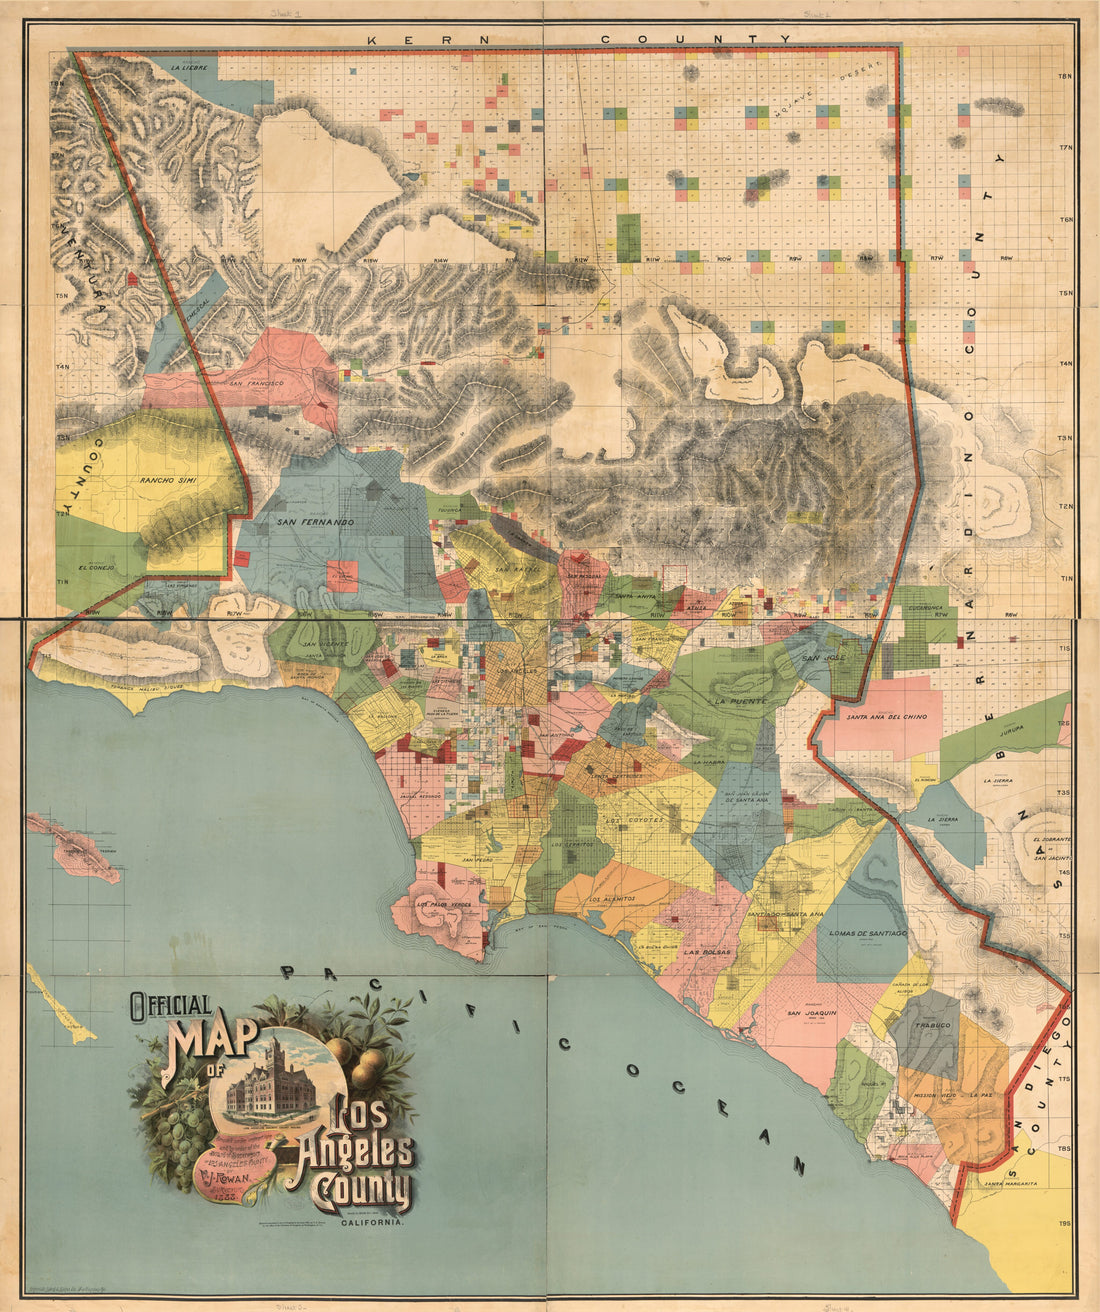 This old map of Official Map of Los Angeles County, California : Compiled Under Instructions and by the Order of the Board of Supervisors of Los Angeles County from 1888 was created by V. J. (Valentine James) Rowan,  Schmidt Label &amp; Litho. Co in 1888